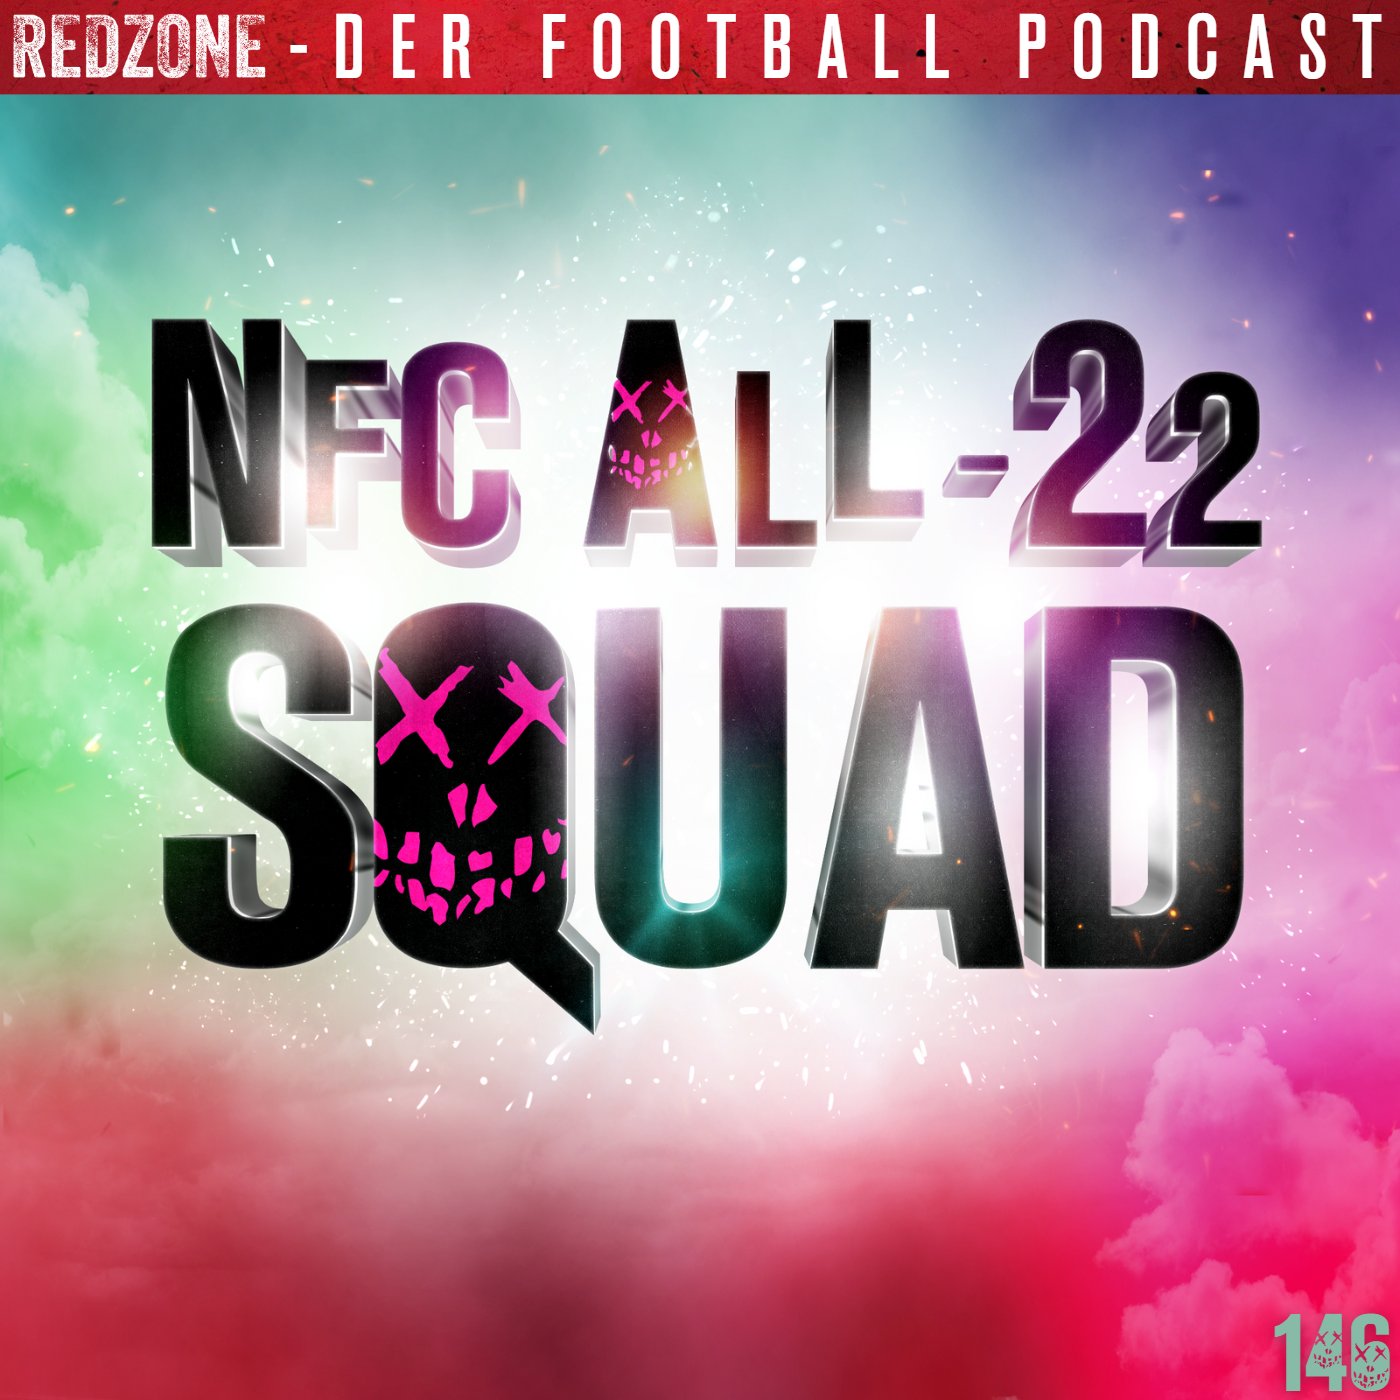 NFC All-22 Squad (EP 146)